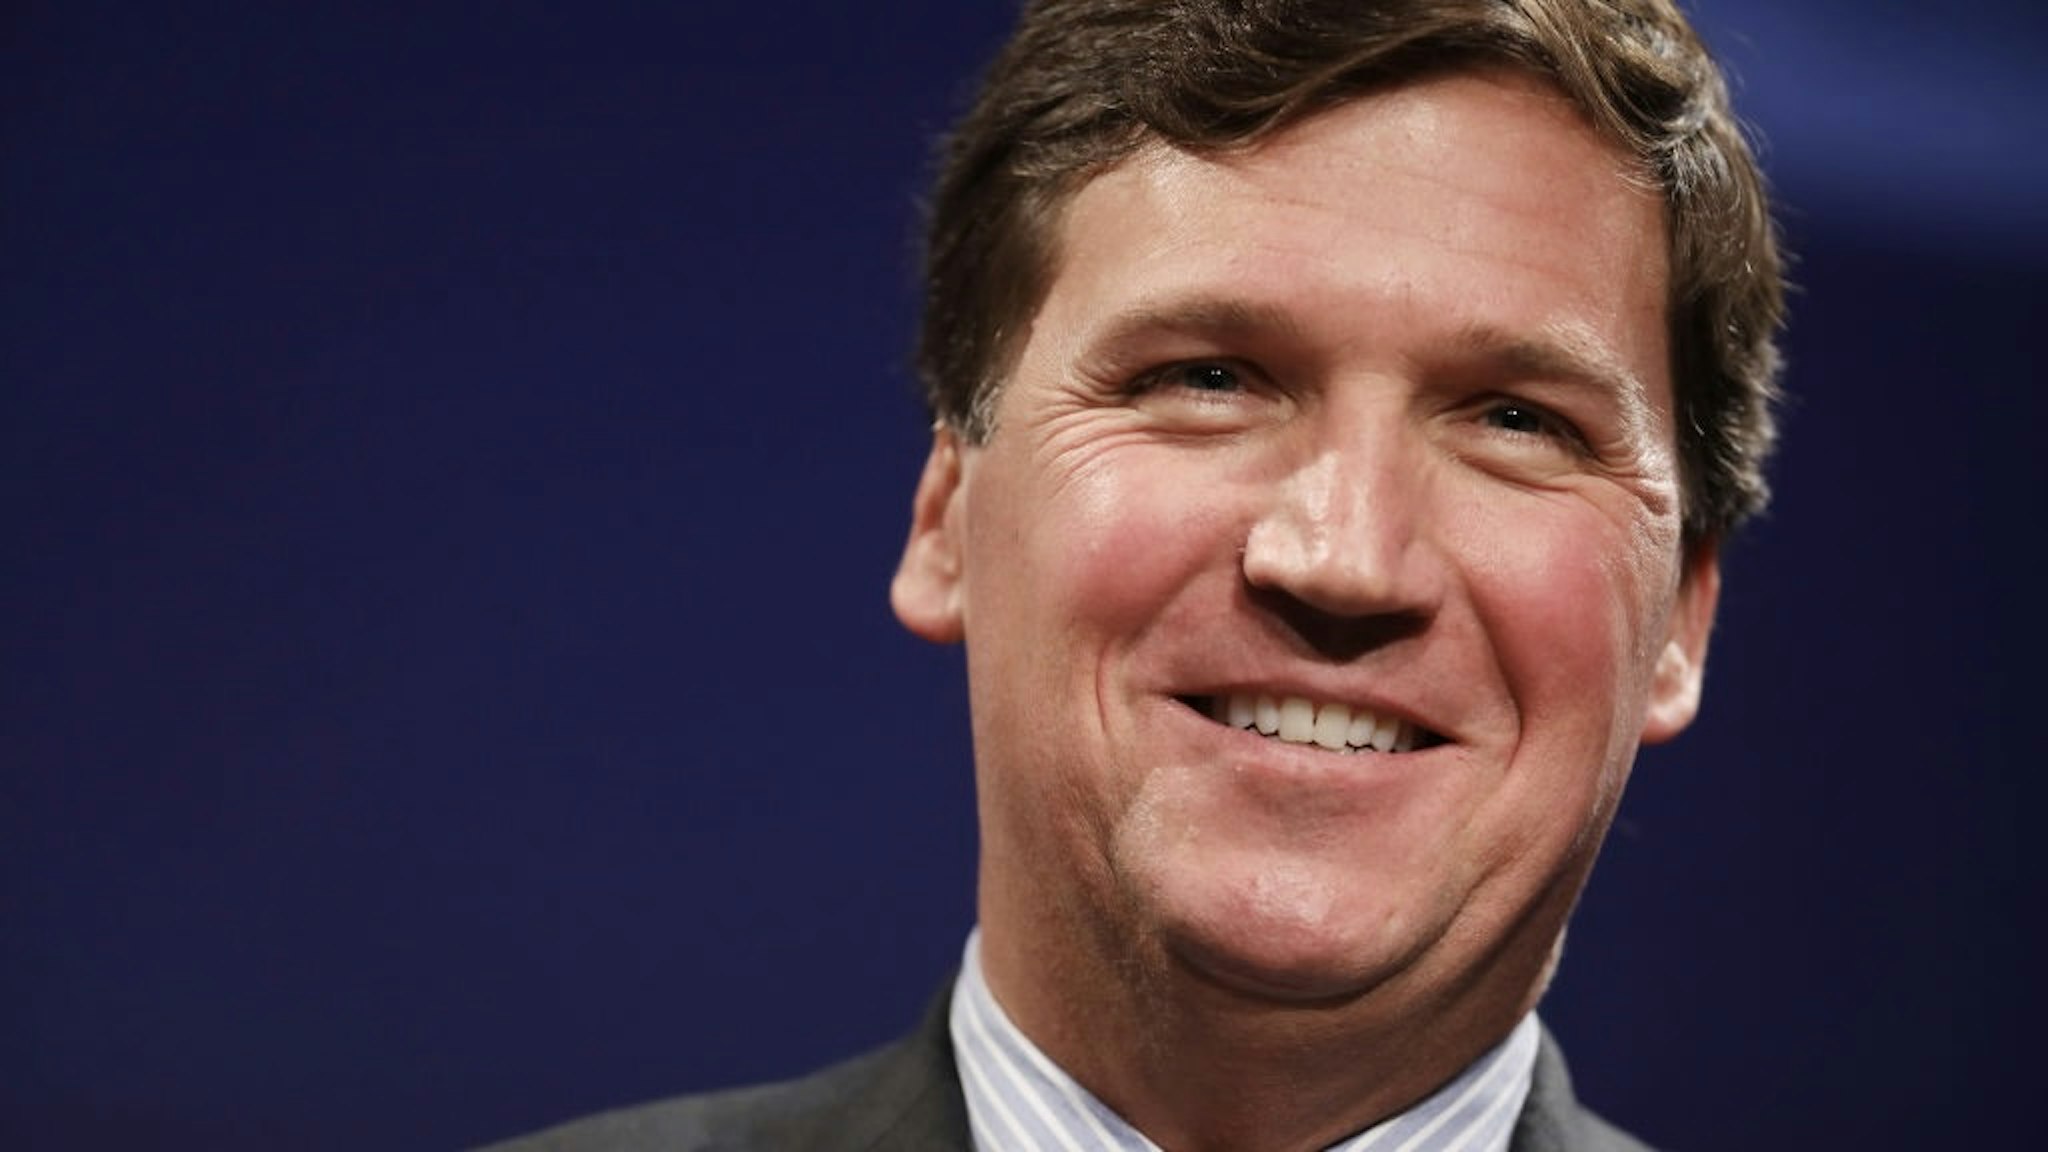 WASHINGTON, DC - MARCH 29: Fox News host Tucker Carlson discusses 'Populism and the Right' during the National Review Institute's Ideas Summit at the Mandarin Oriental Hotel March 29, 2019 in Washington, DC.